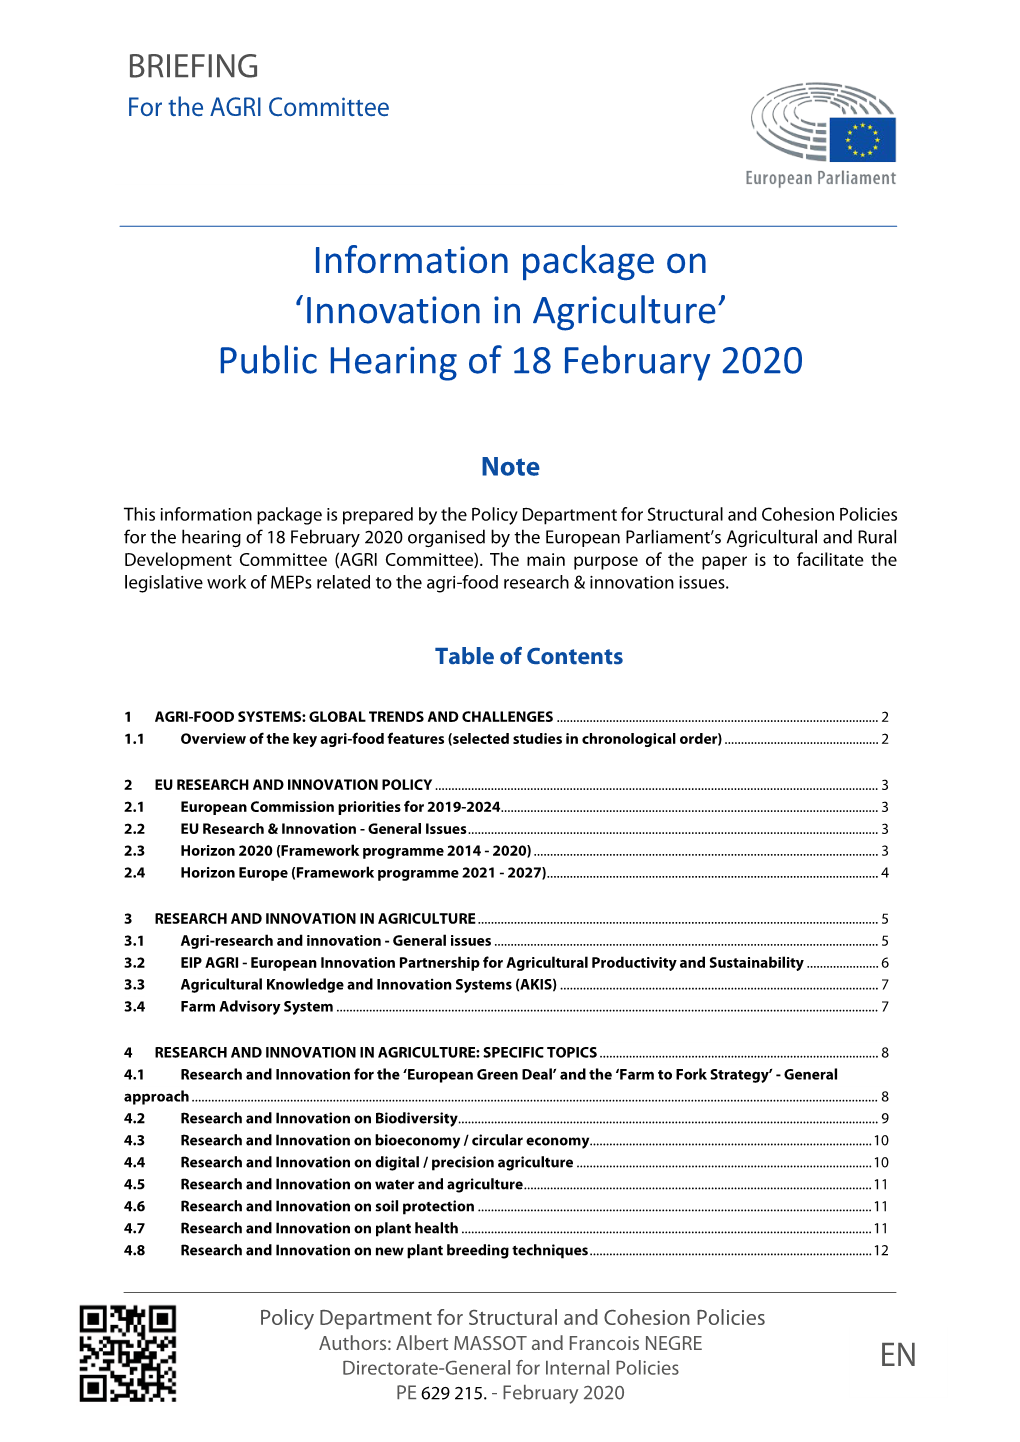 "Innovation in Agriculture" Public Hearing of 18 February 2020